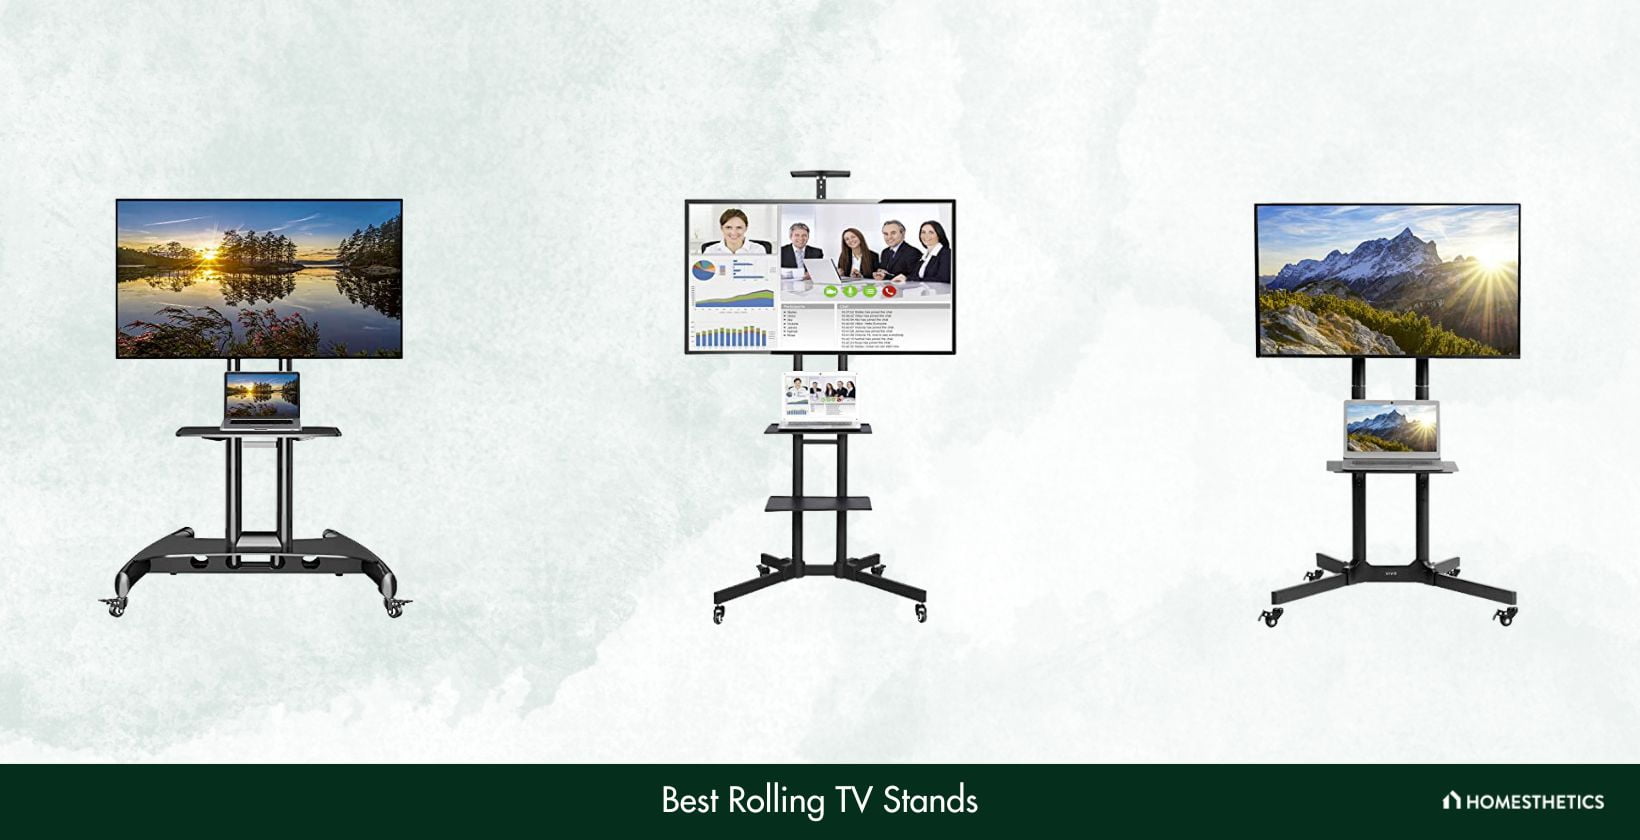 Best Rolling TV Stands